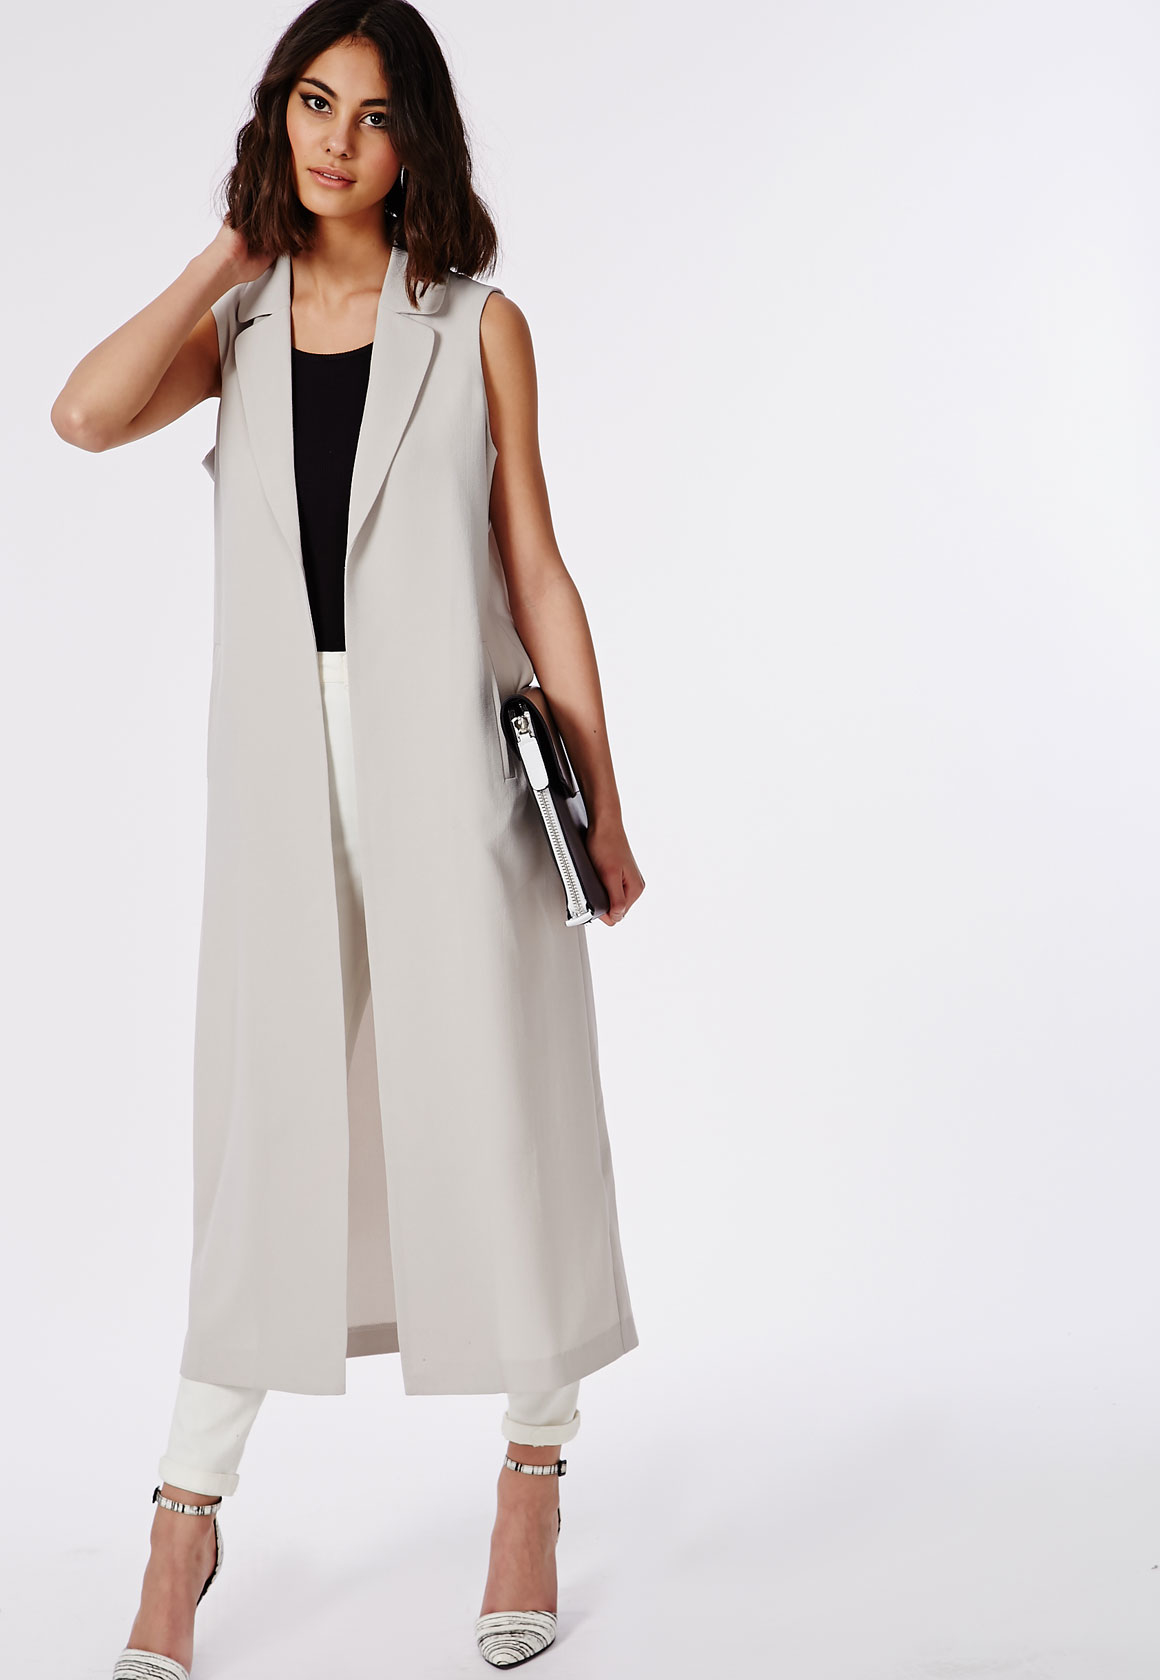 Lyst - Missguided Maxi Sleeveless Duster Coat Grey in Gray